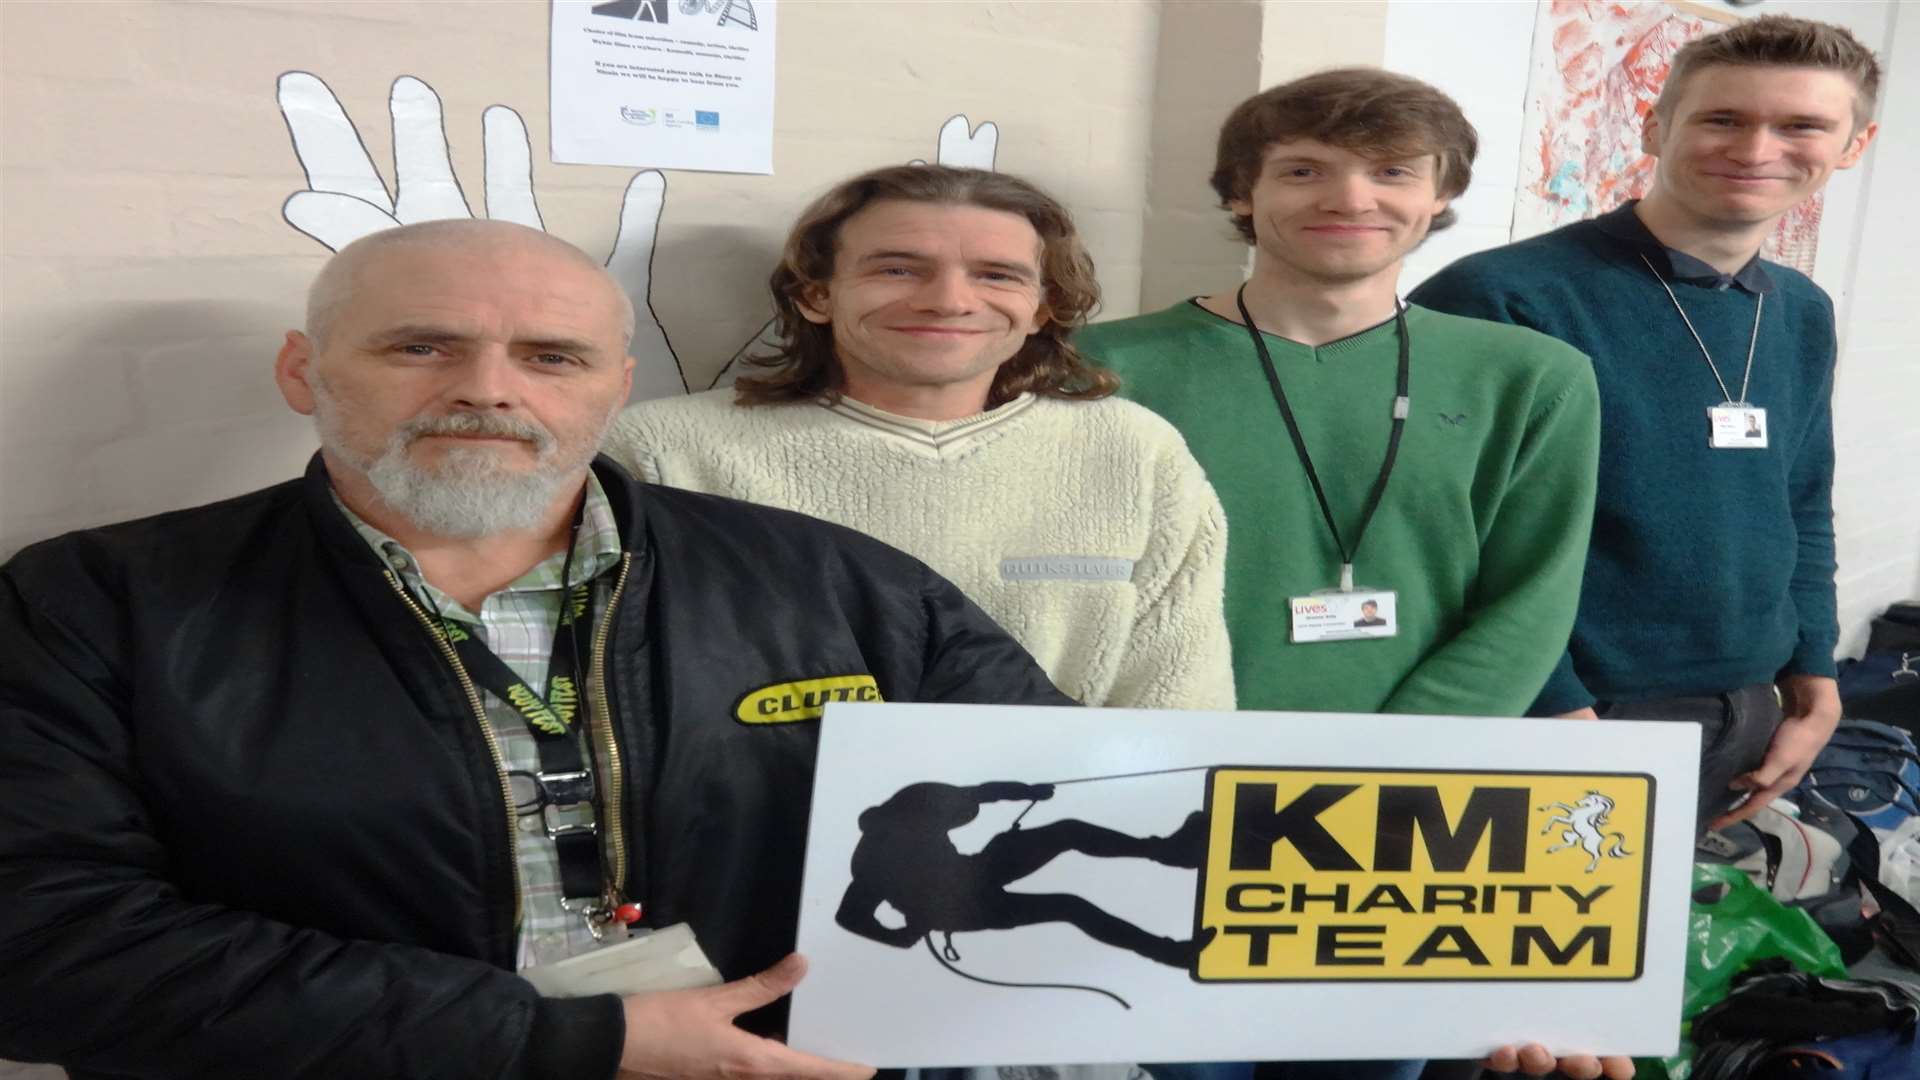 From left Terry Gore, general manager of Catching Lives, with James Duff, Graeme Solly and Mike Osborn who are taking part in the KM abseil event in Maidstone on March 15 to raise funds for the Canterbury based charity.